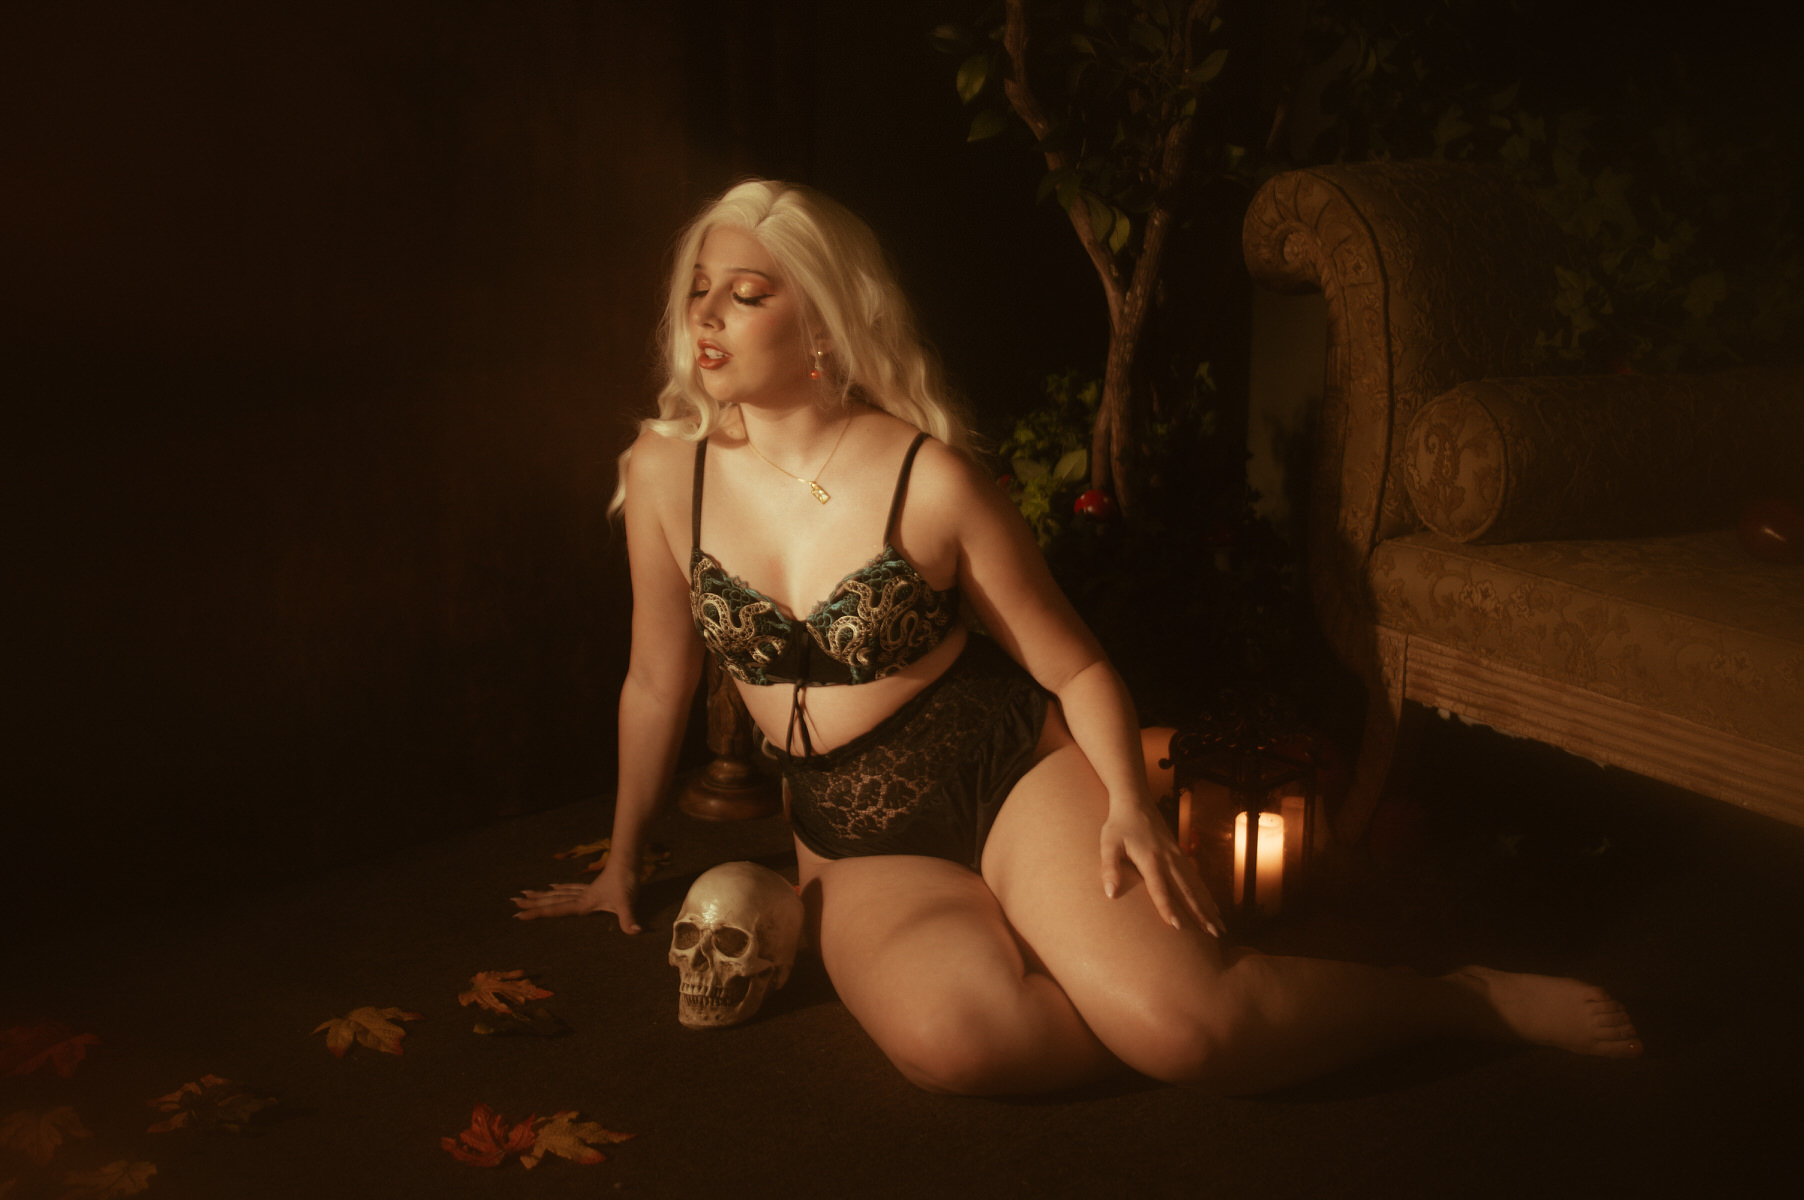 A woman posing for a Halloween themed boudoir photoshoot with a skull and candles.